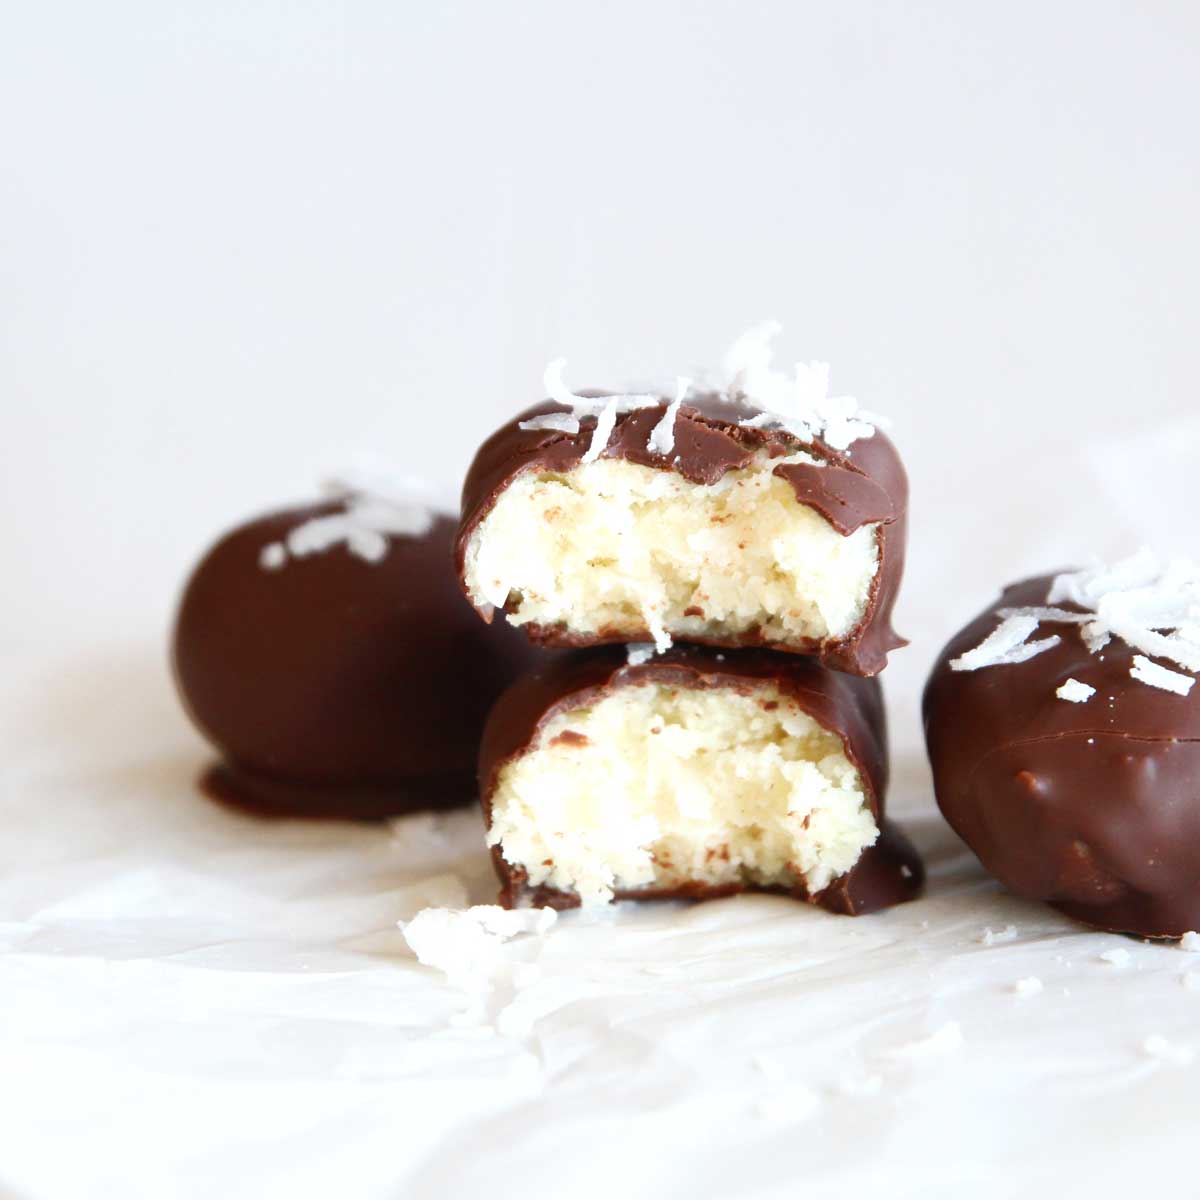 Chocolate Coconut Easter Eggs Made with Collagen Protein Powder - Vegan Scones with Cornstarch